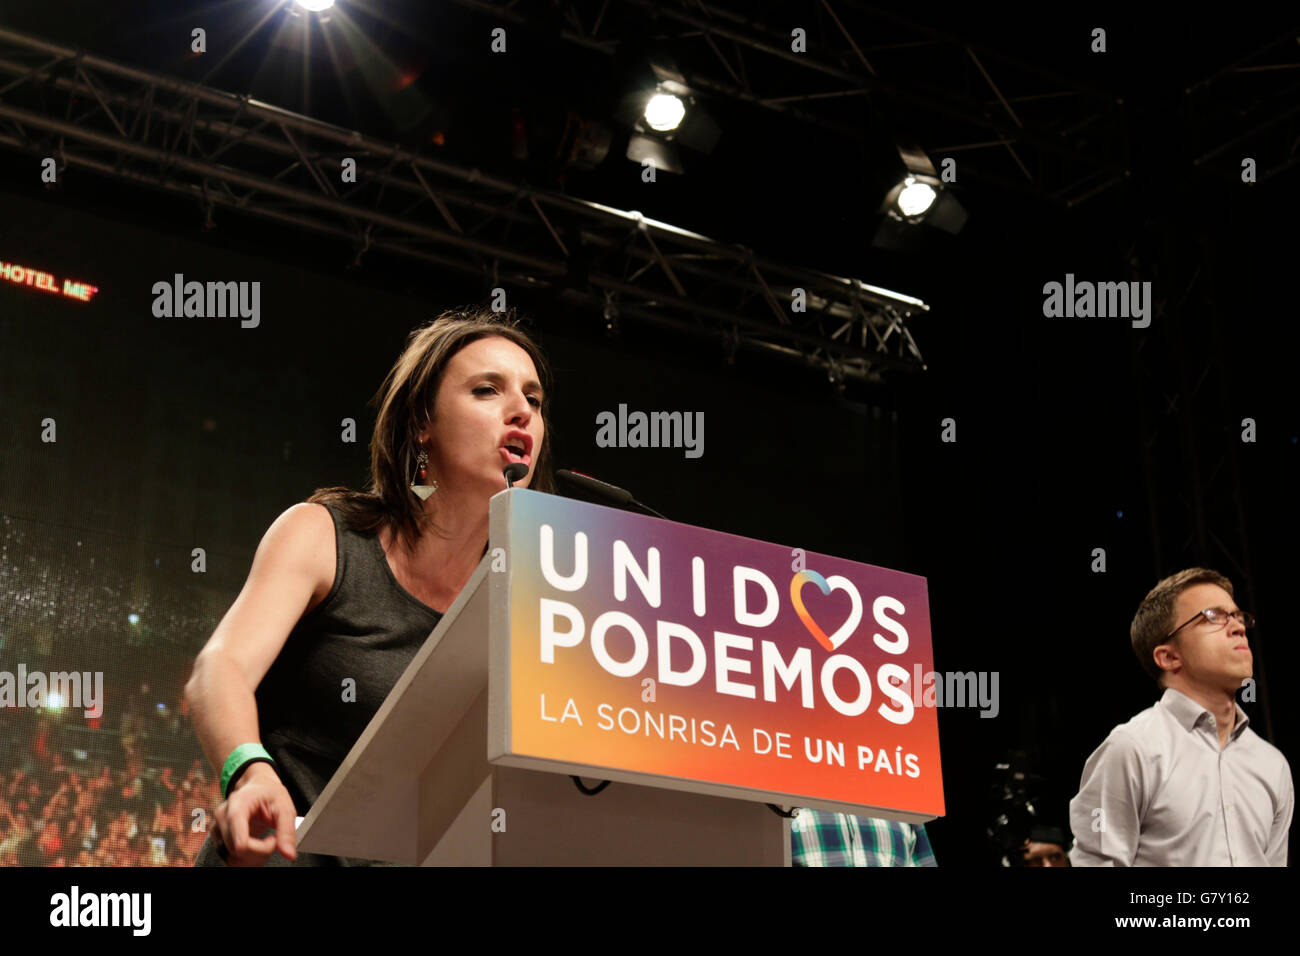 Madrid, Spain. 27th Jun, 2016. Irene Montero of the Spanish anti-austerity party Podemos (We Can) tries to cheer up their supporters on the election night in Madrid after the coalition of left-wing parties Unidos Podemos (Together We Can) failed to achieve expected results in the repeated general election on 26 June 2016. Credit:  Mira Galanova/Alamy Live News Stock Photo